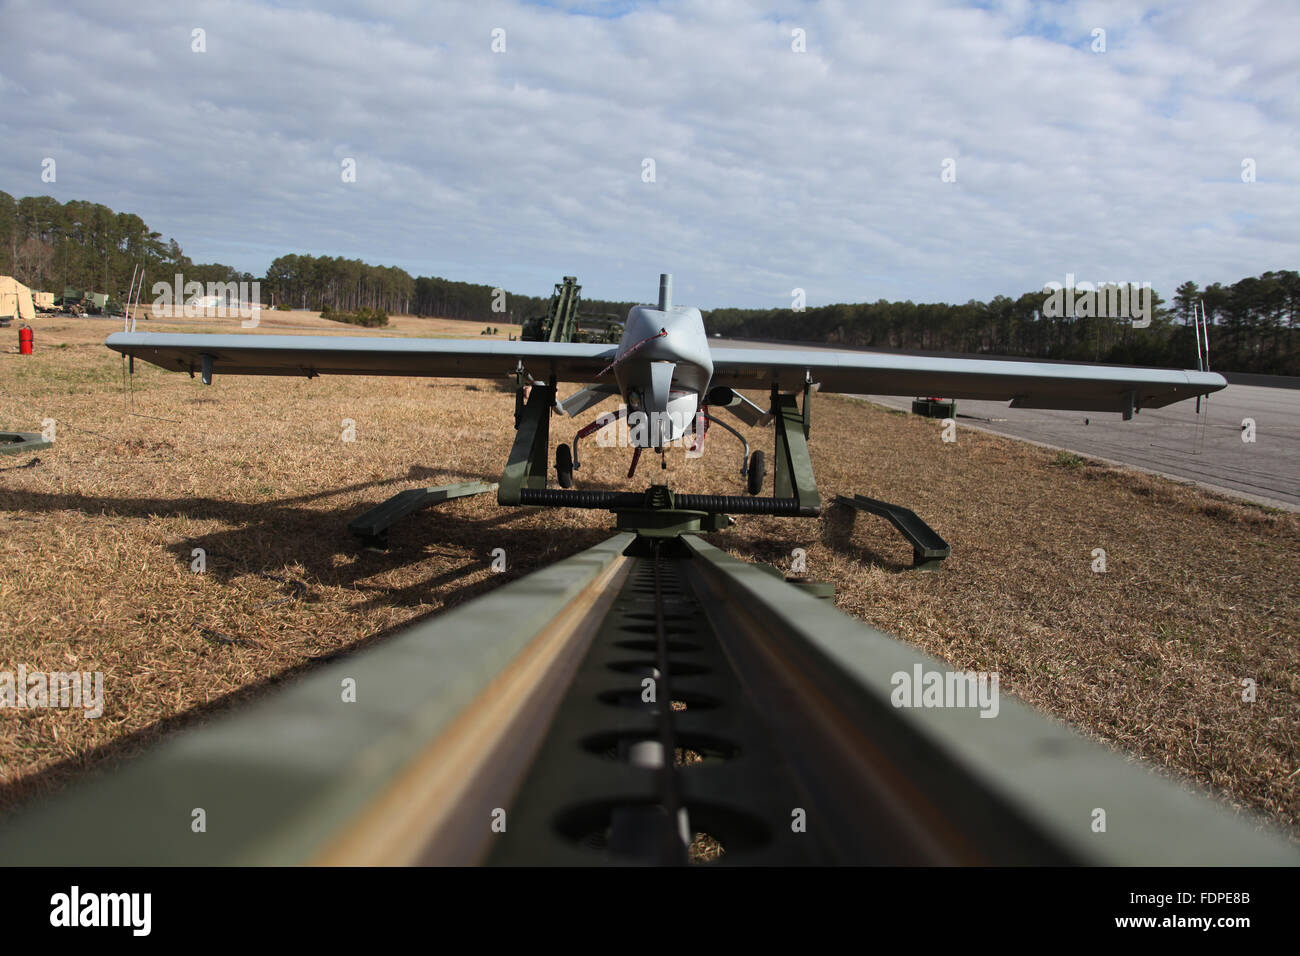 U.S. military unmanned aerial vehicles - UAVs - or as most commonly known - drones. Stock Photo